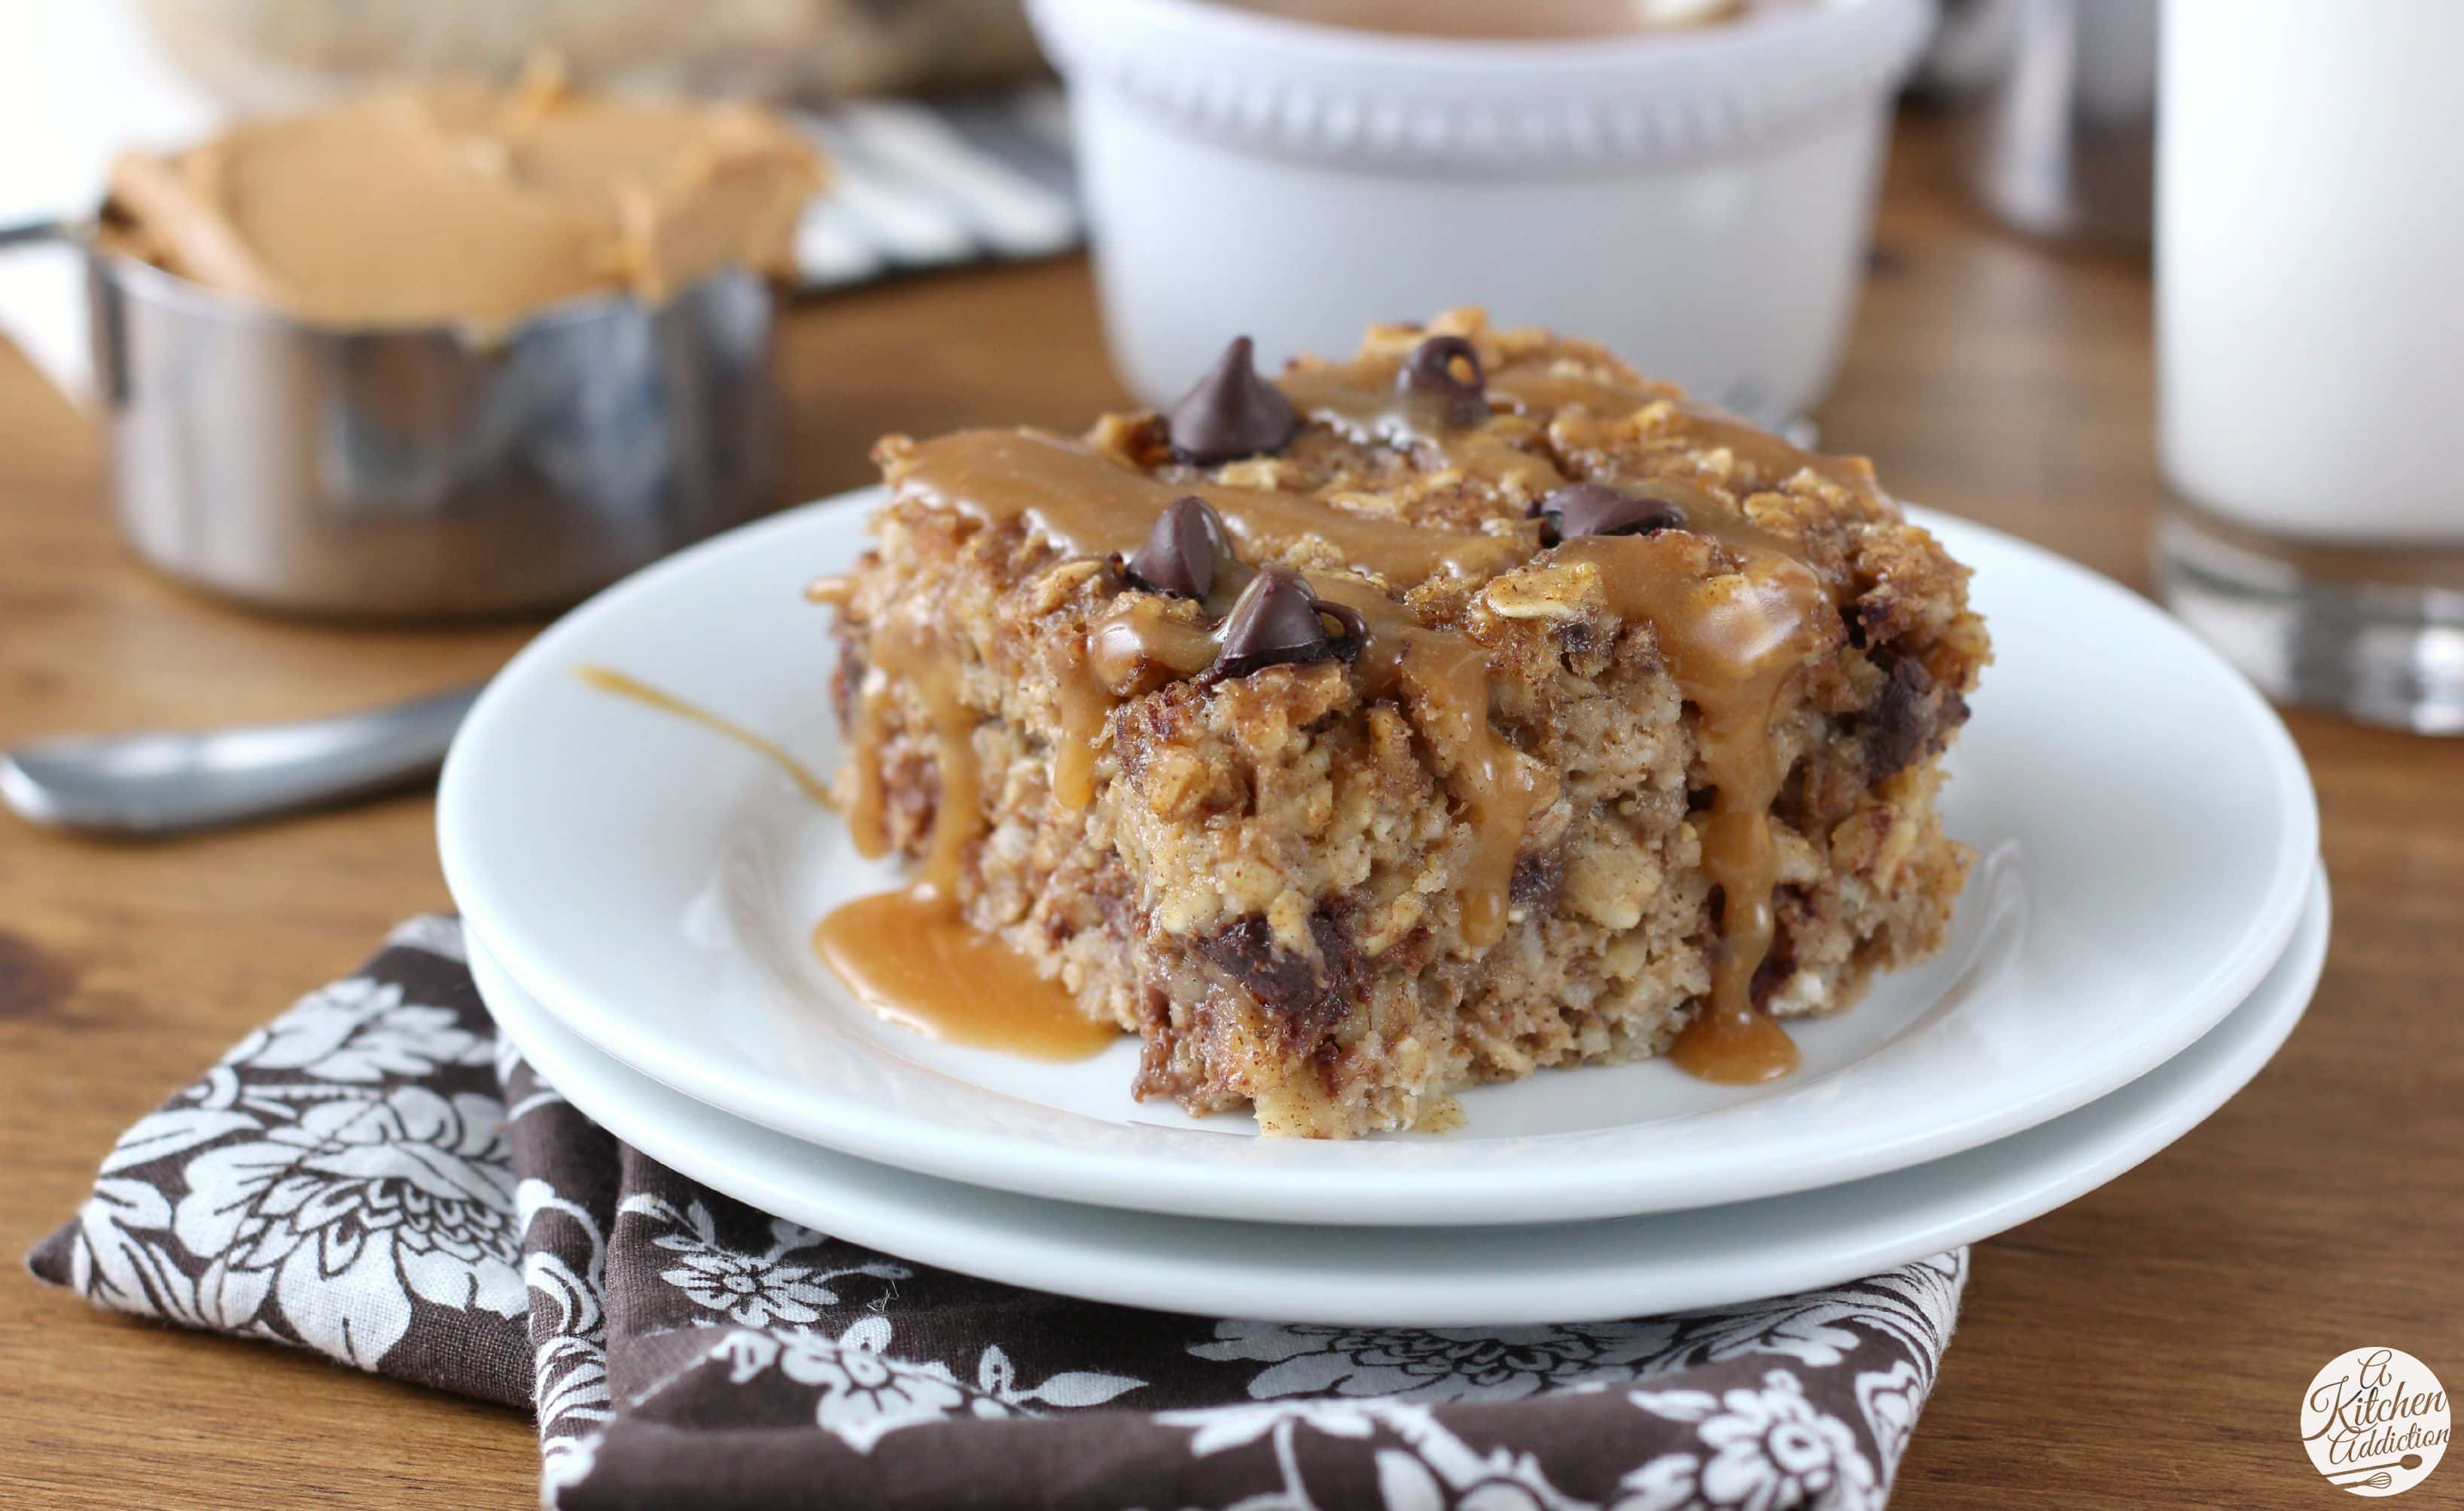 Peanut Butter Chocolate Chip Banana Bread Baked Oatmeal with Peanut Butter Syrup from A Kitchen Addiction